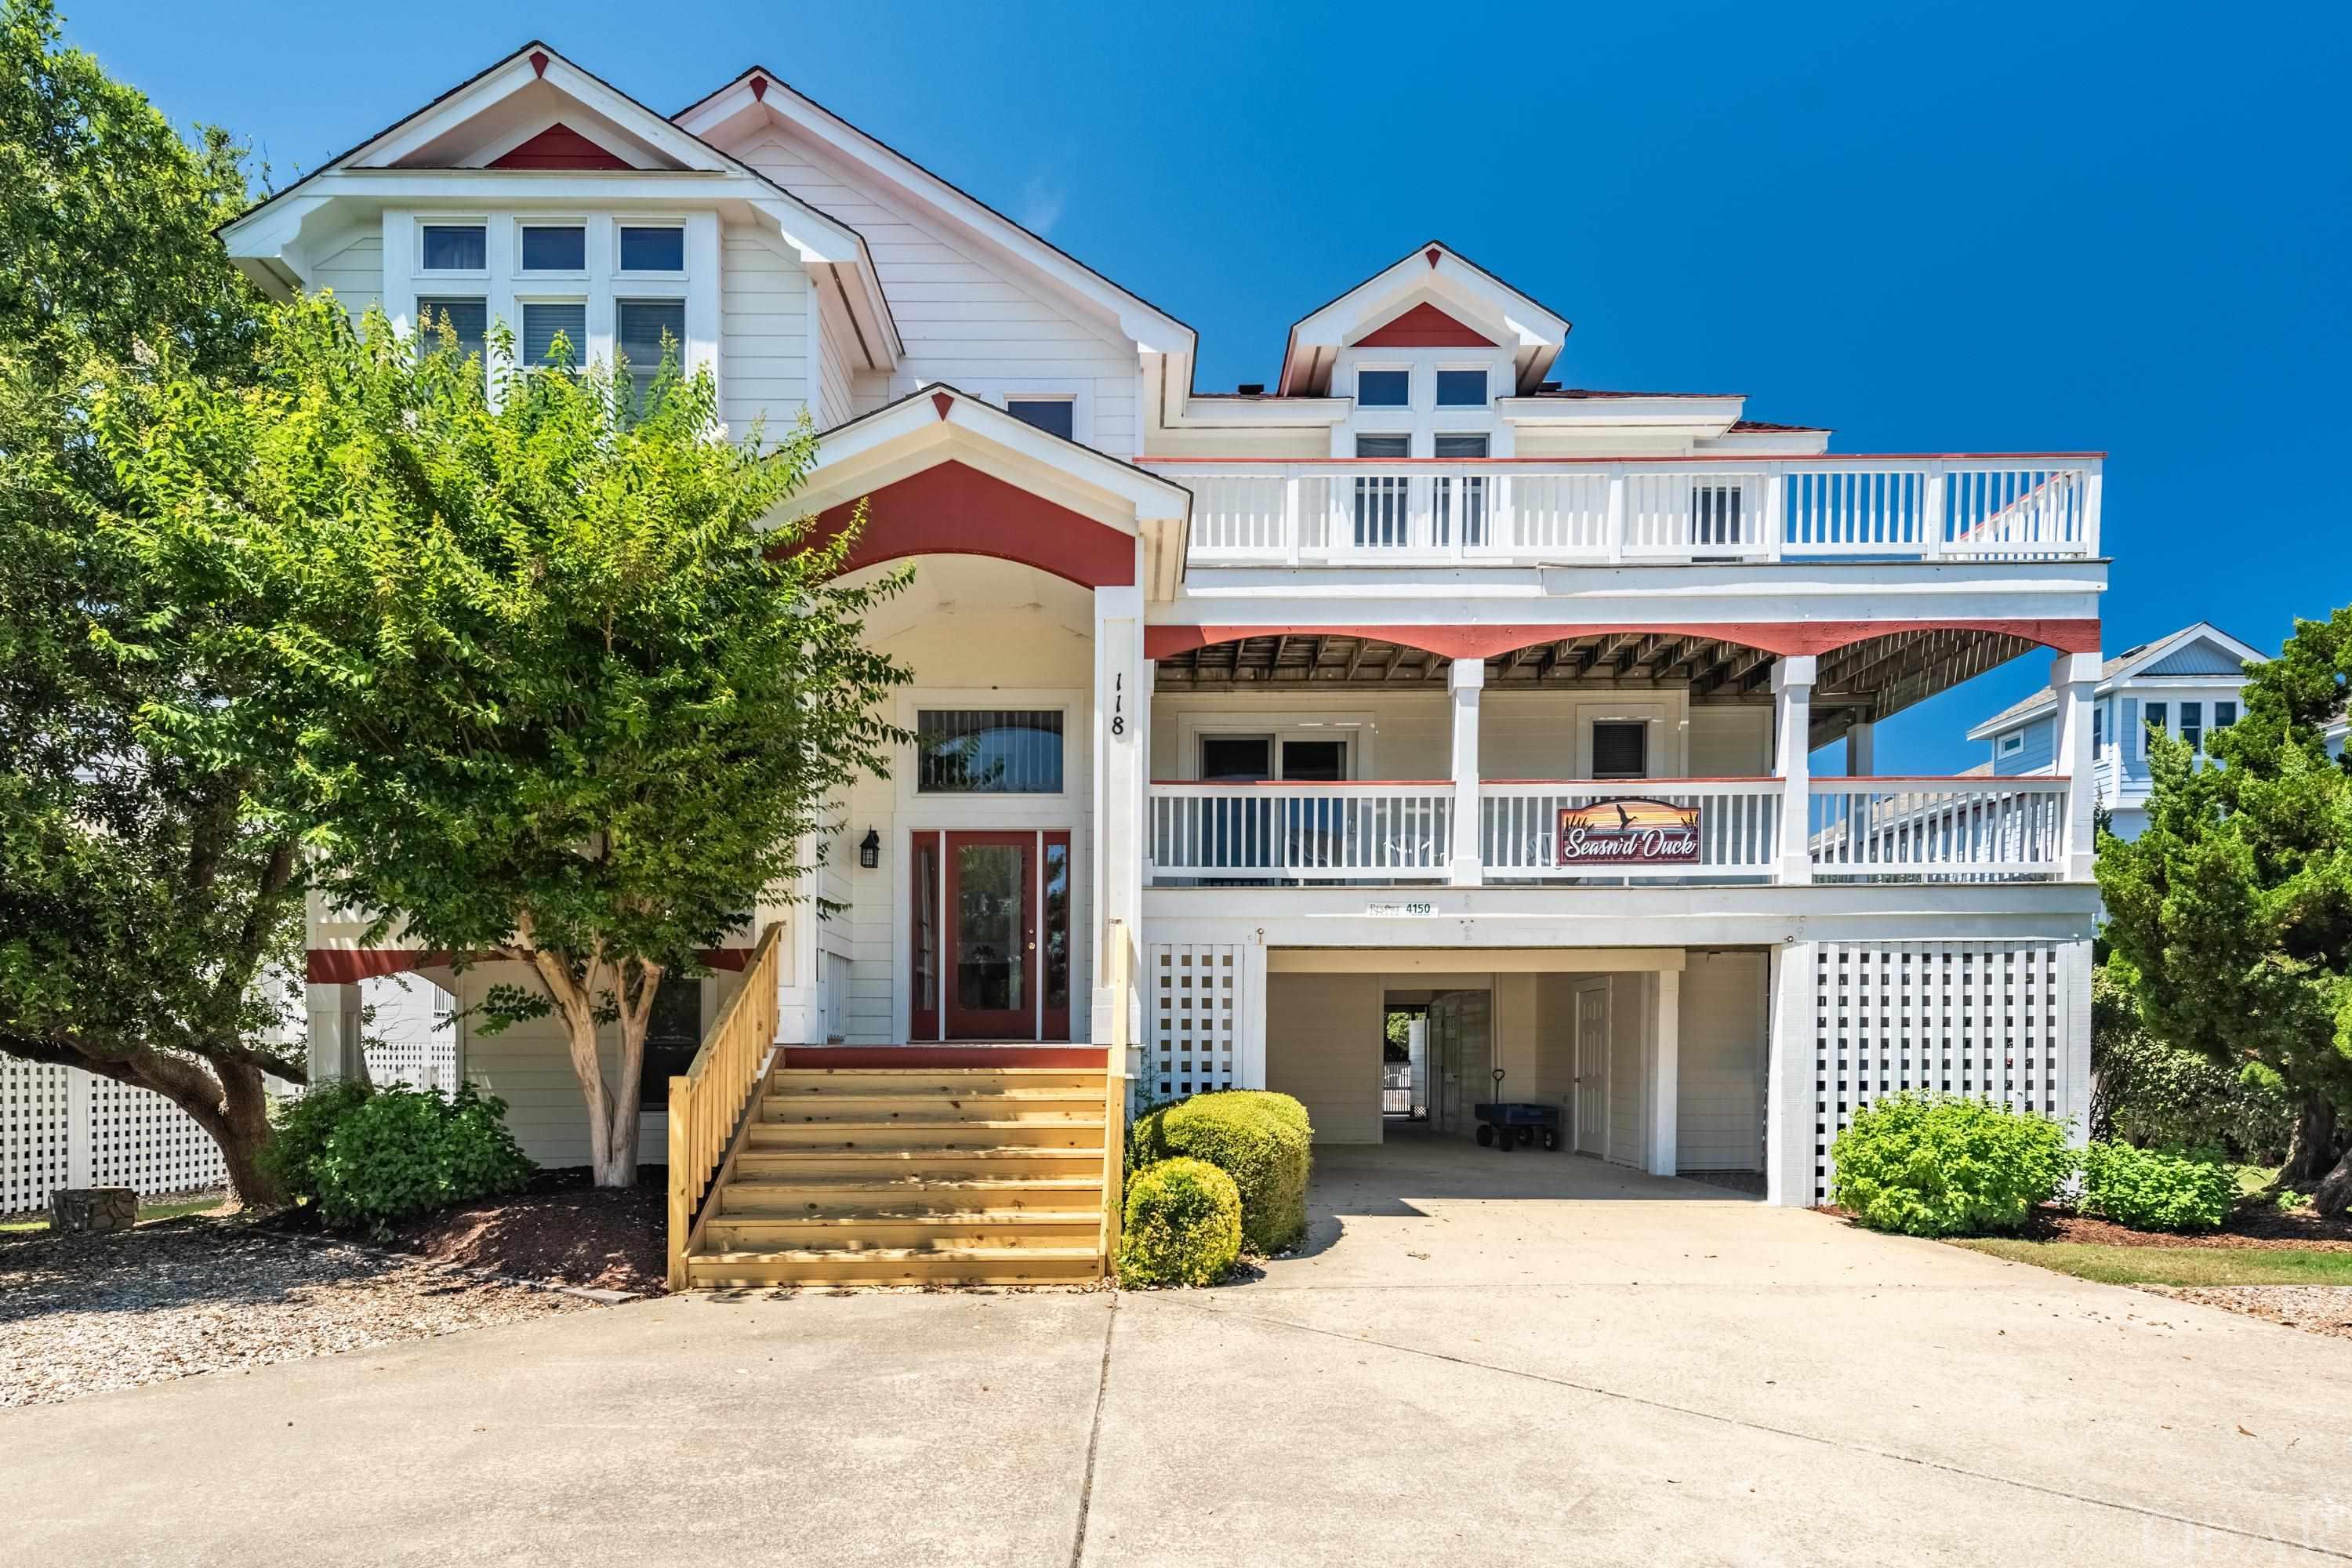 This vibrant 8-bedroom Duck home has attracted guests for years with its wonderful location, community amenities and warm interior. This cottage offers a welcoming place to entertain and enjoy time together on the Outer Banks. Located in the Four Seasons community, this home is within walking distance to the unique shopping and dining areas of downtown Duck and soundfront boardwalk.   Just on the other side of the back yard fence is a shaded concrete path that leads to Lala Court where the beach access is located. New owners can immediately move in and start enjoying the charms of living in Duck. The home has a warm appeal with its sunny exterior, large light reflecting windows and sliders, allowing natural light to pour in. On the top level is a great room with soaring cathedral ceilings, sparkling white walls, gas fireplace and powder room. A well-equipped kitchen with cooktop, a range/oven, large refrigerator, 2 dishwashers and ice maker. Solid surface countertops and island provide a wonderful prep area and additional seating. This open concept space also includes room for a dining area and breakfast nook.  Unique design with 2 primary en-suite bedrooms on the top floor.  The mid-level hosts 3 en-suite bedrooms with private bathrooms and deck access, plus one bedroom that shares bath with den.  Deck can be accessed from den.  Washer and Dryer are conveniently located on this level.  Downstairs is a wonderful rec room with pool table, TV, wet bar with refrigerator and microwave. 2 Additional bedrooms and hall bath. Entertaining is made easy outdoors with the large 16’ X 34’ pool, hot tub, volleyball court, child’s playhouse, outdoor shower with toilet, a basketball hoop in the front of the house.  Improvements include:  new roof at the beginning of 2020, new pool liner 2021, some new pool furniture last year (2021). Most Kitchen appliances were replaced in 2018 and 2019 except for cooktop. Microwave being replaced this week.  Hot tub, both water heaters and 2 of the 3 air conditioning units were replaced when the house was first bought  (2016).   Community amenities include clubhouse with rec room, fitness center, indoor pool, outdoor pool, tennis court, soundside pier.  Trolley during Summer